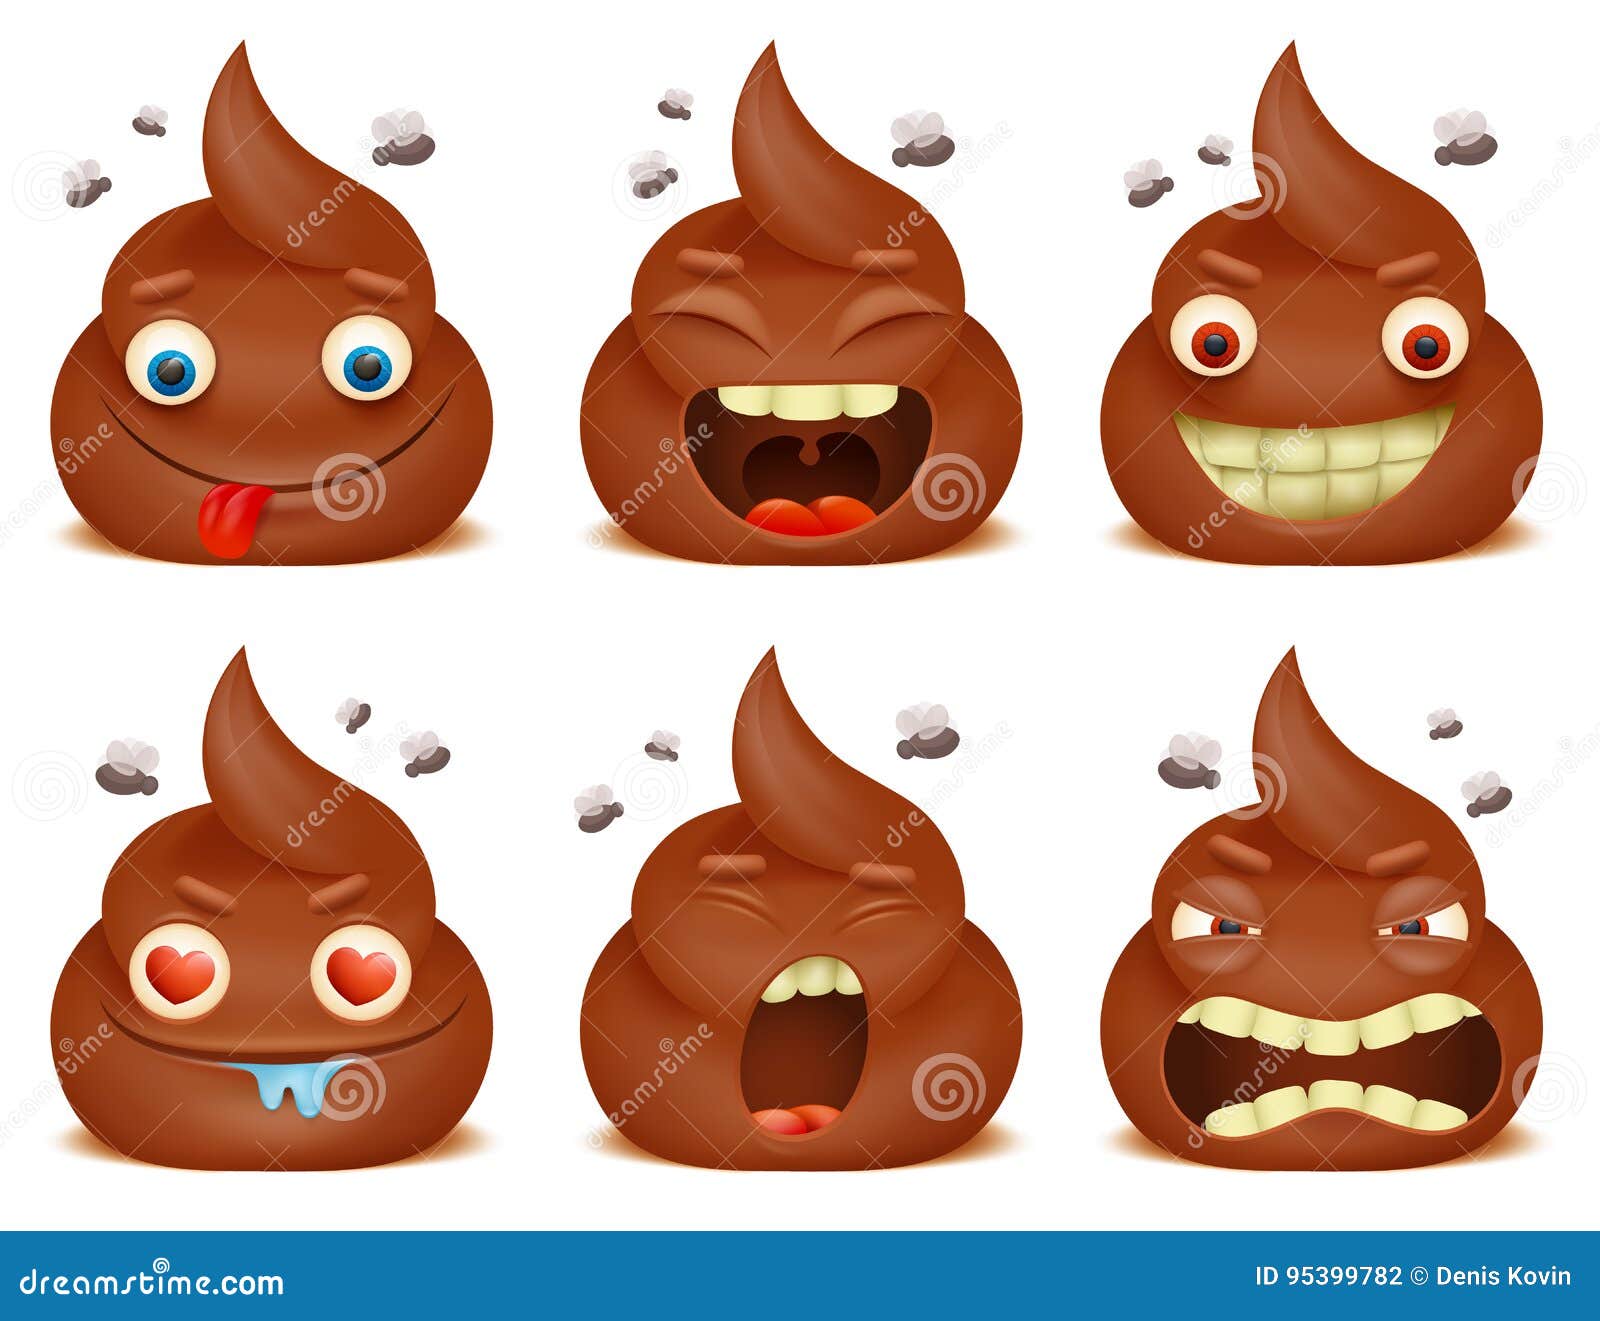 set of funny poo emoticon cartoon characters